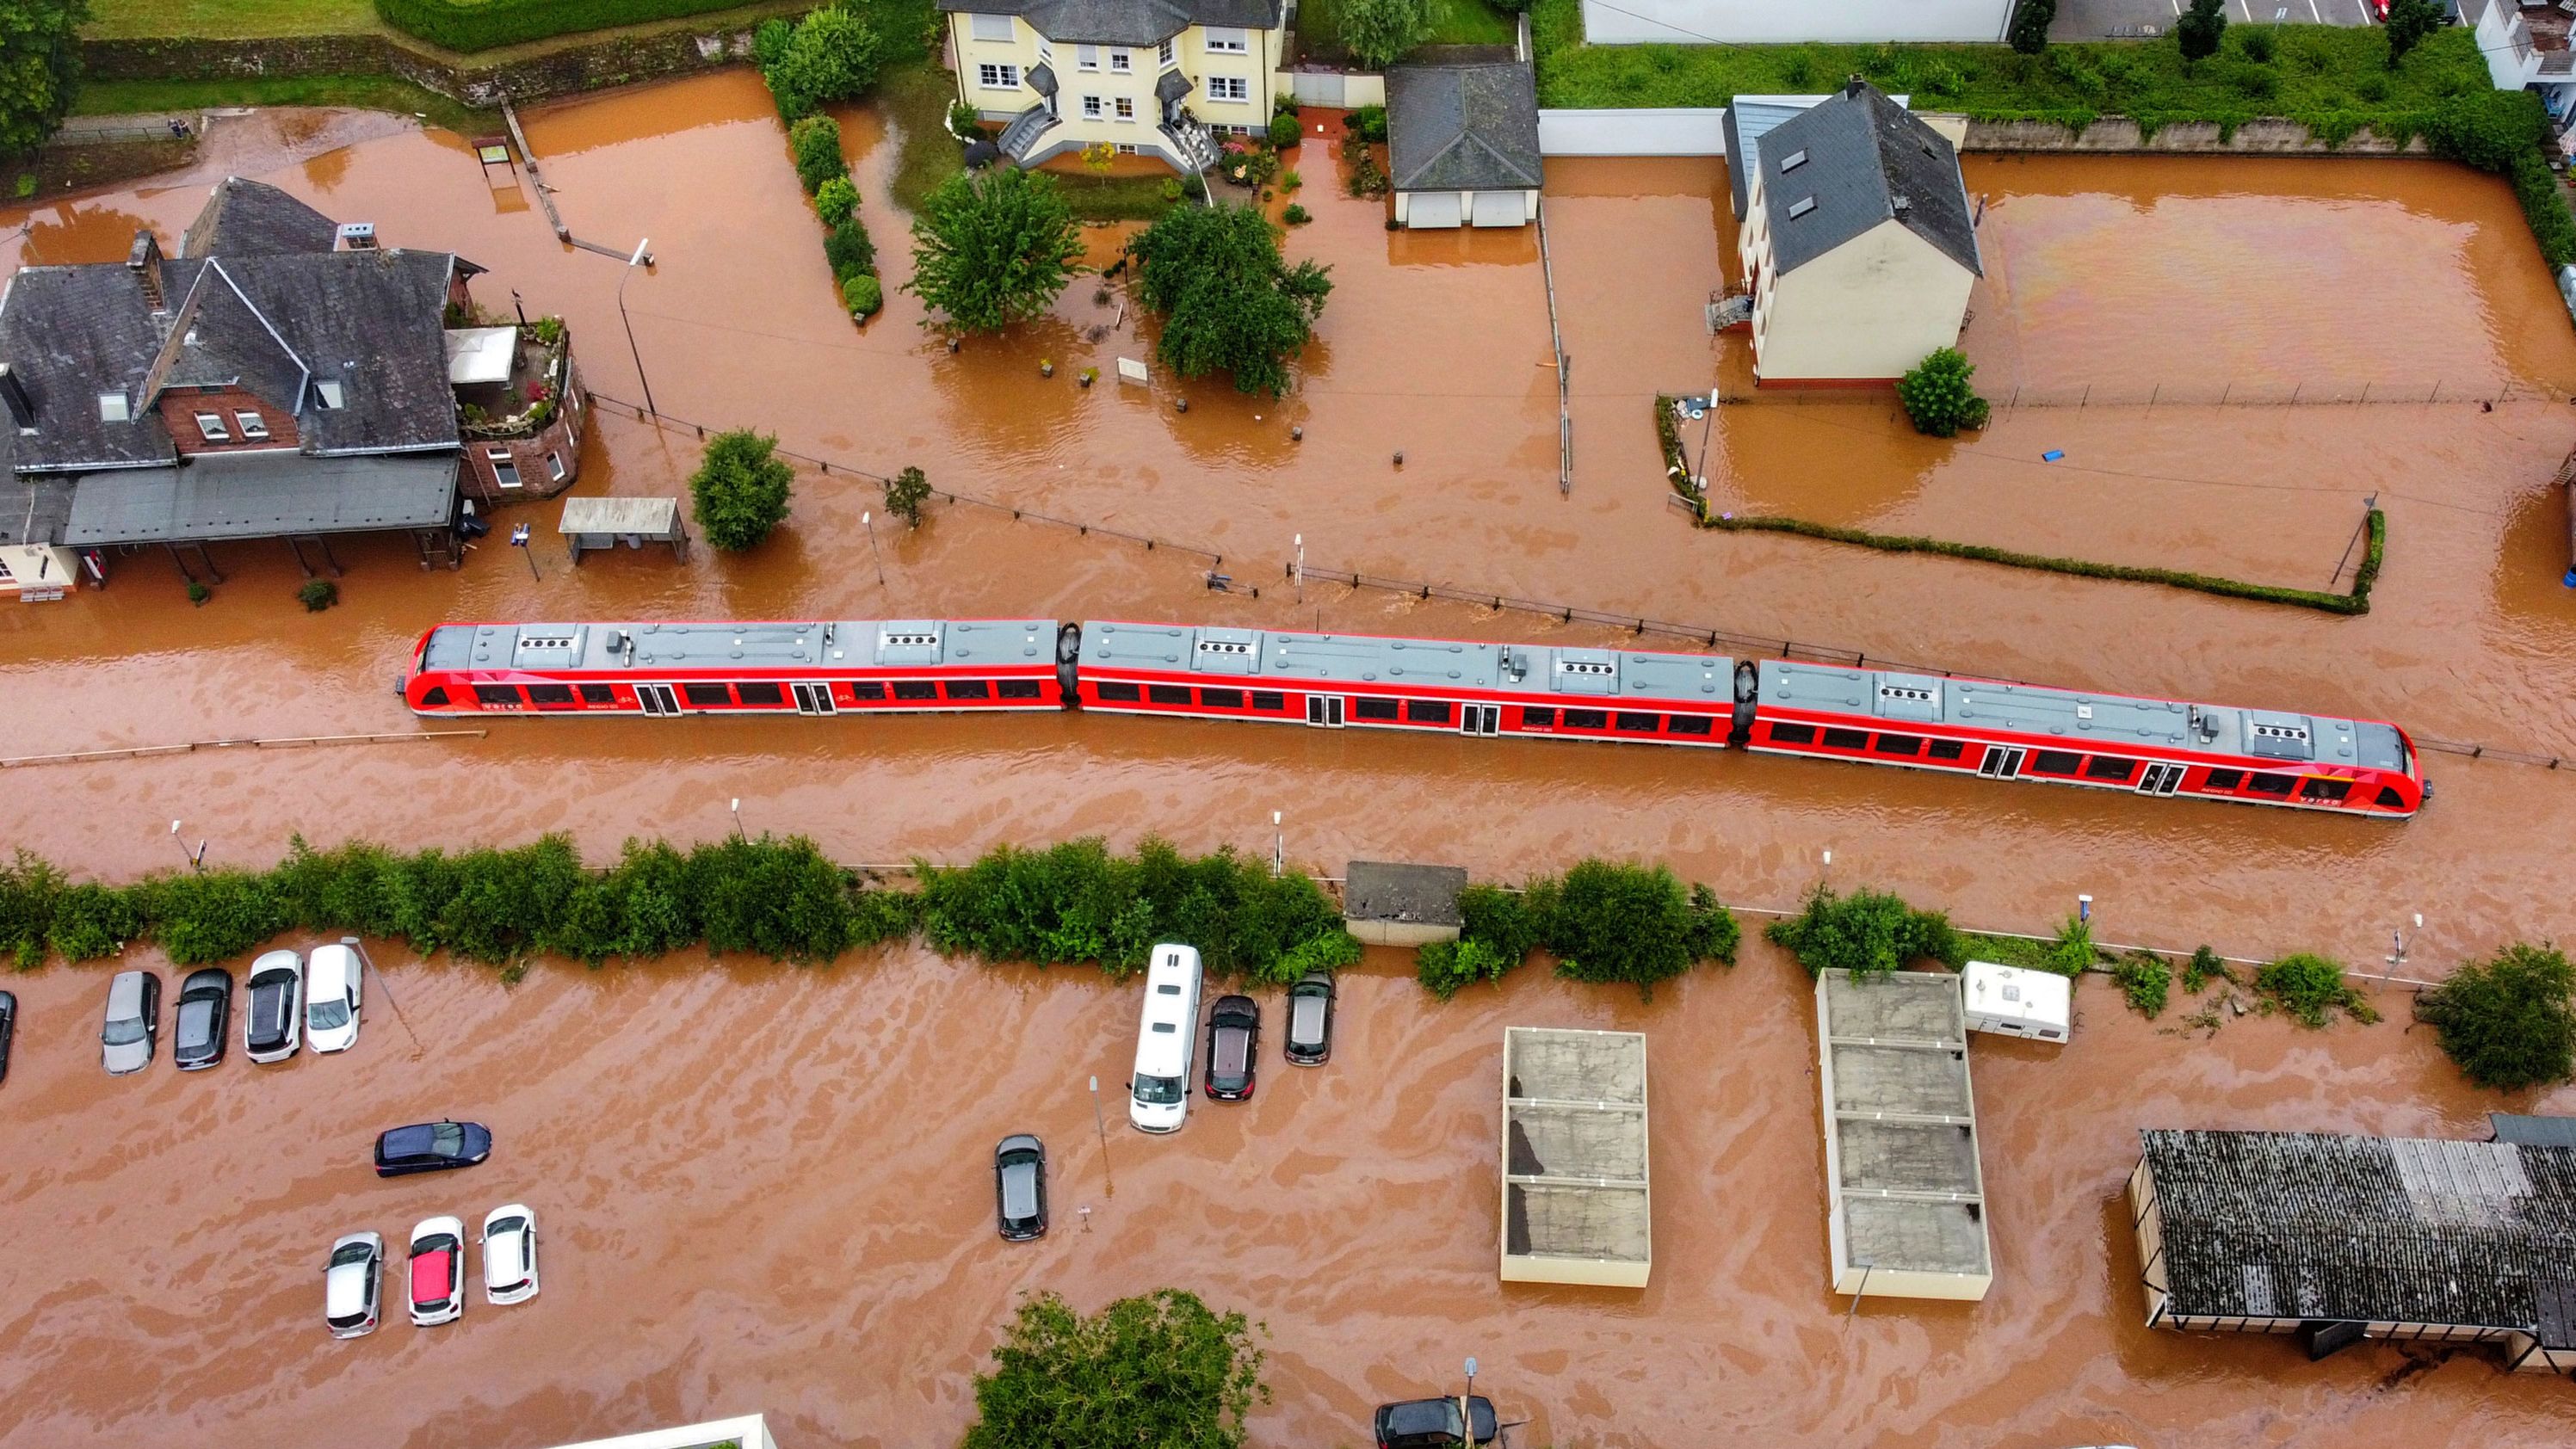 A regional train sits in floodwaters at the local station in Kordel, Germany.